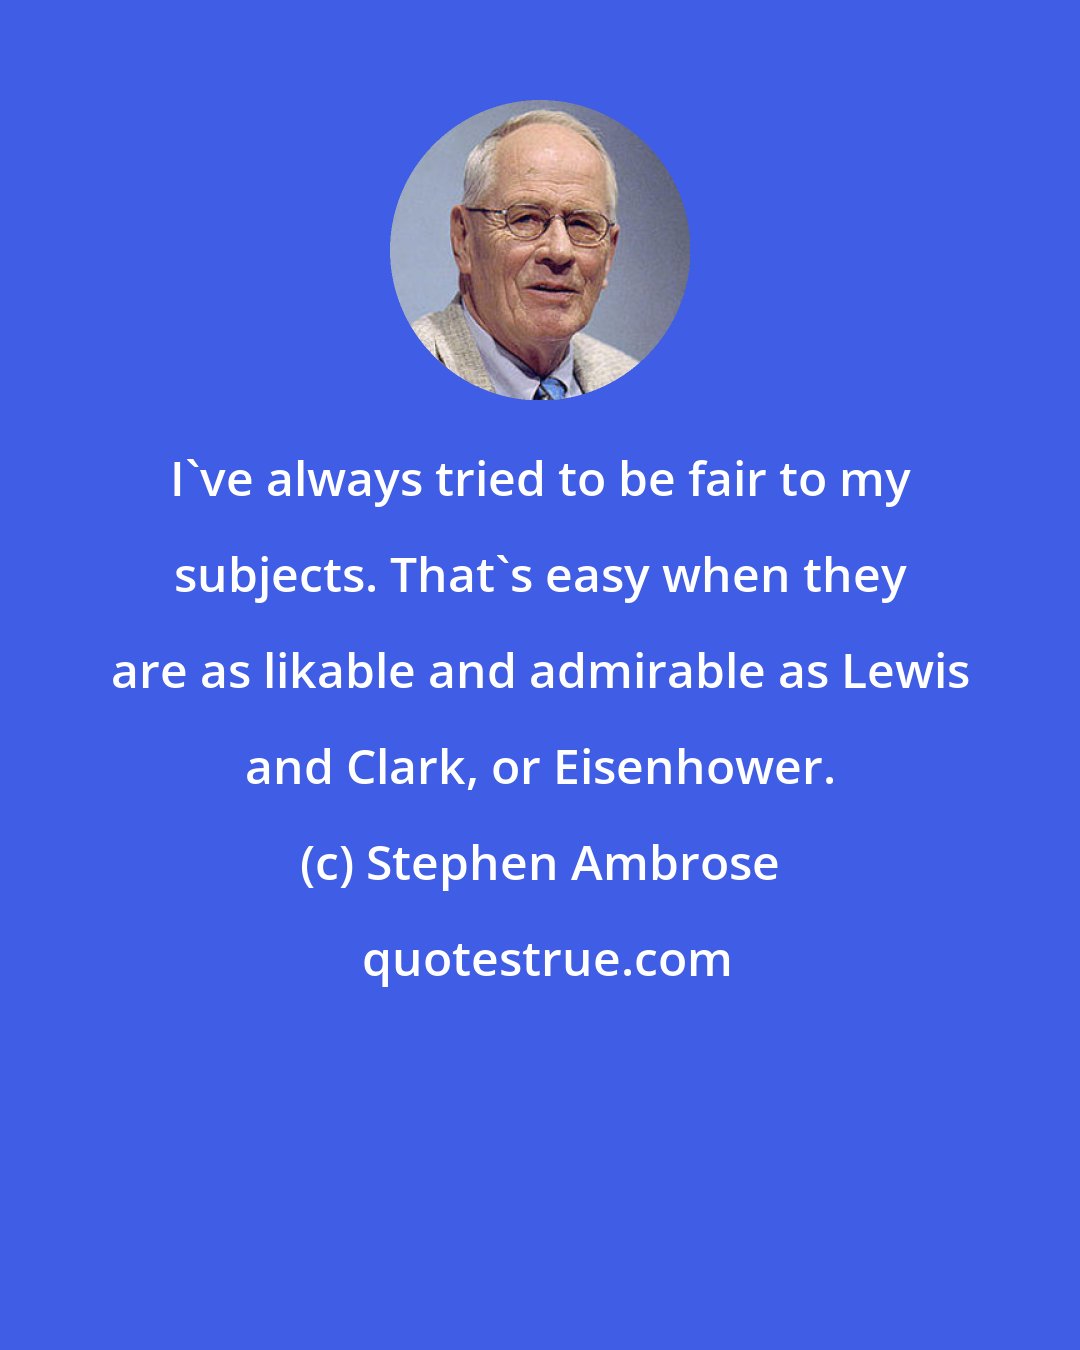 Stephen Ambrose: I've always tried to be fair to my subjects. That's easy when they are as likable and admirable as Lewis and Clark, or Eisenhower.